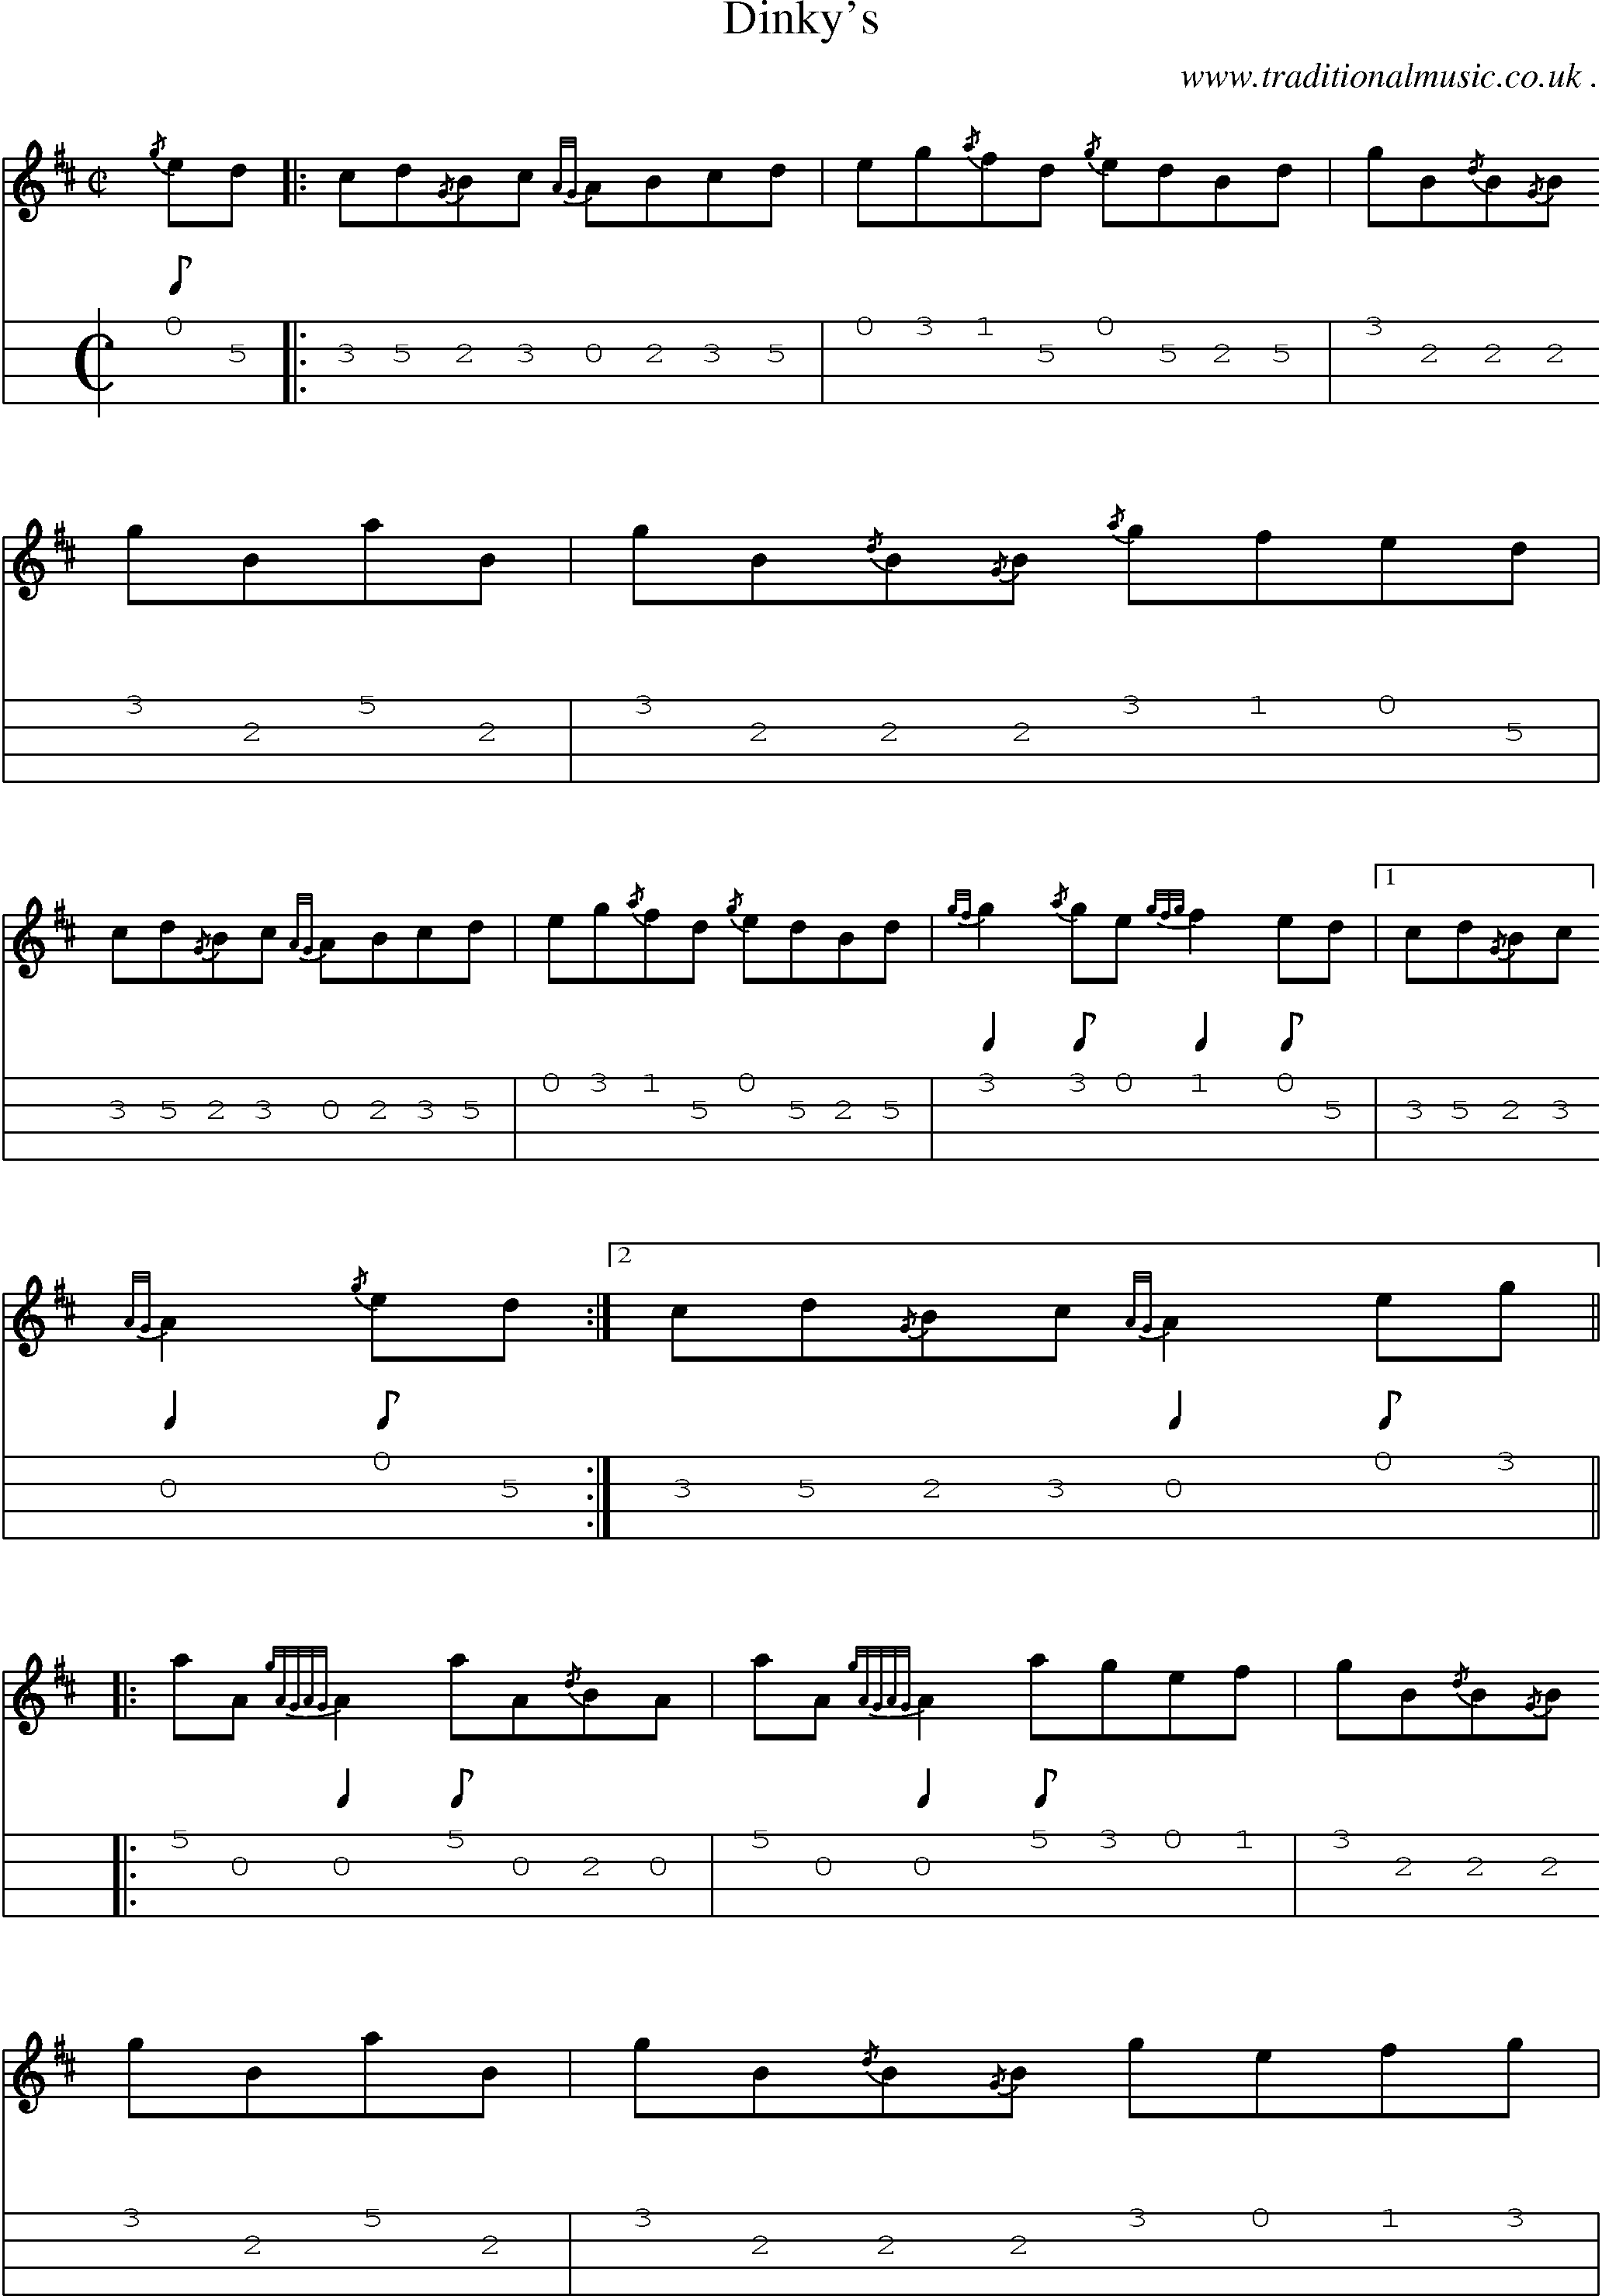 Sheet-music  score, Chords and Mandolin Tabs for Dinkys